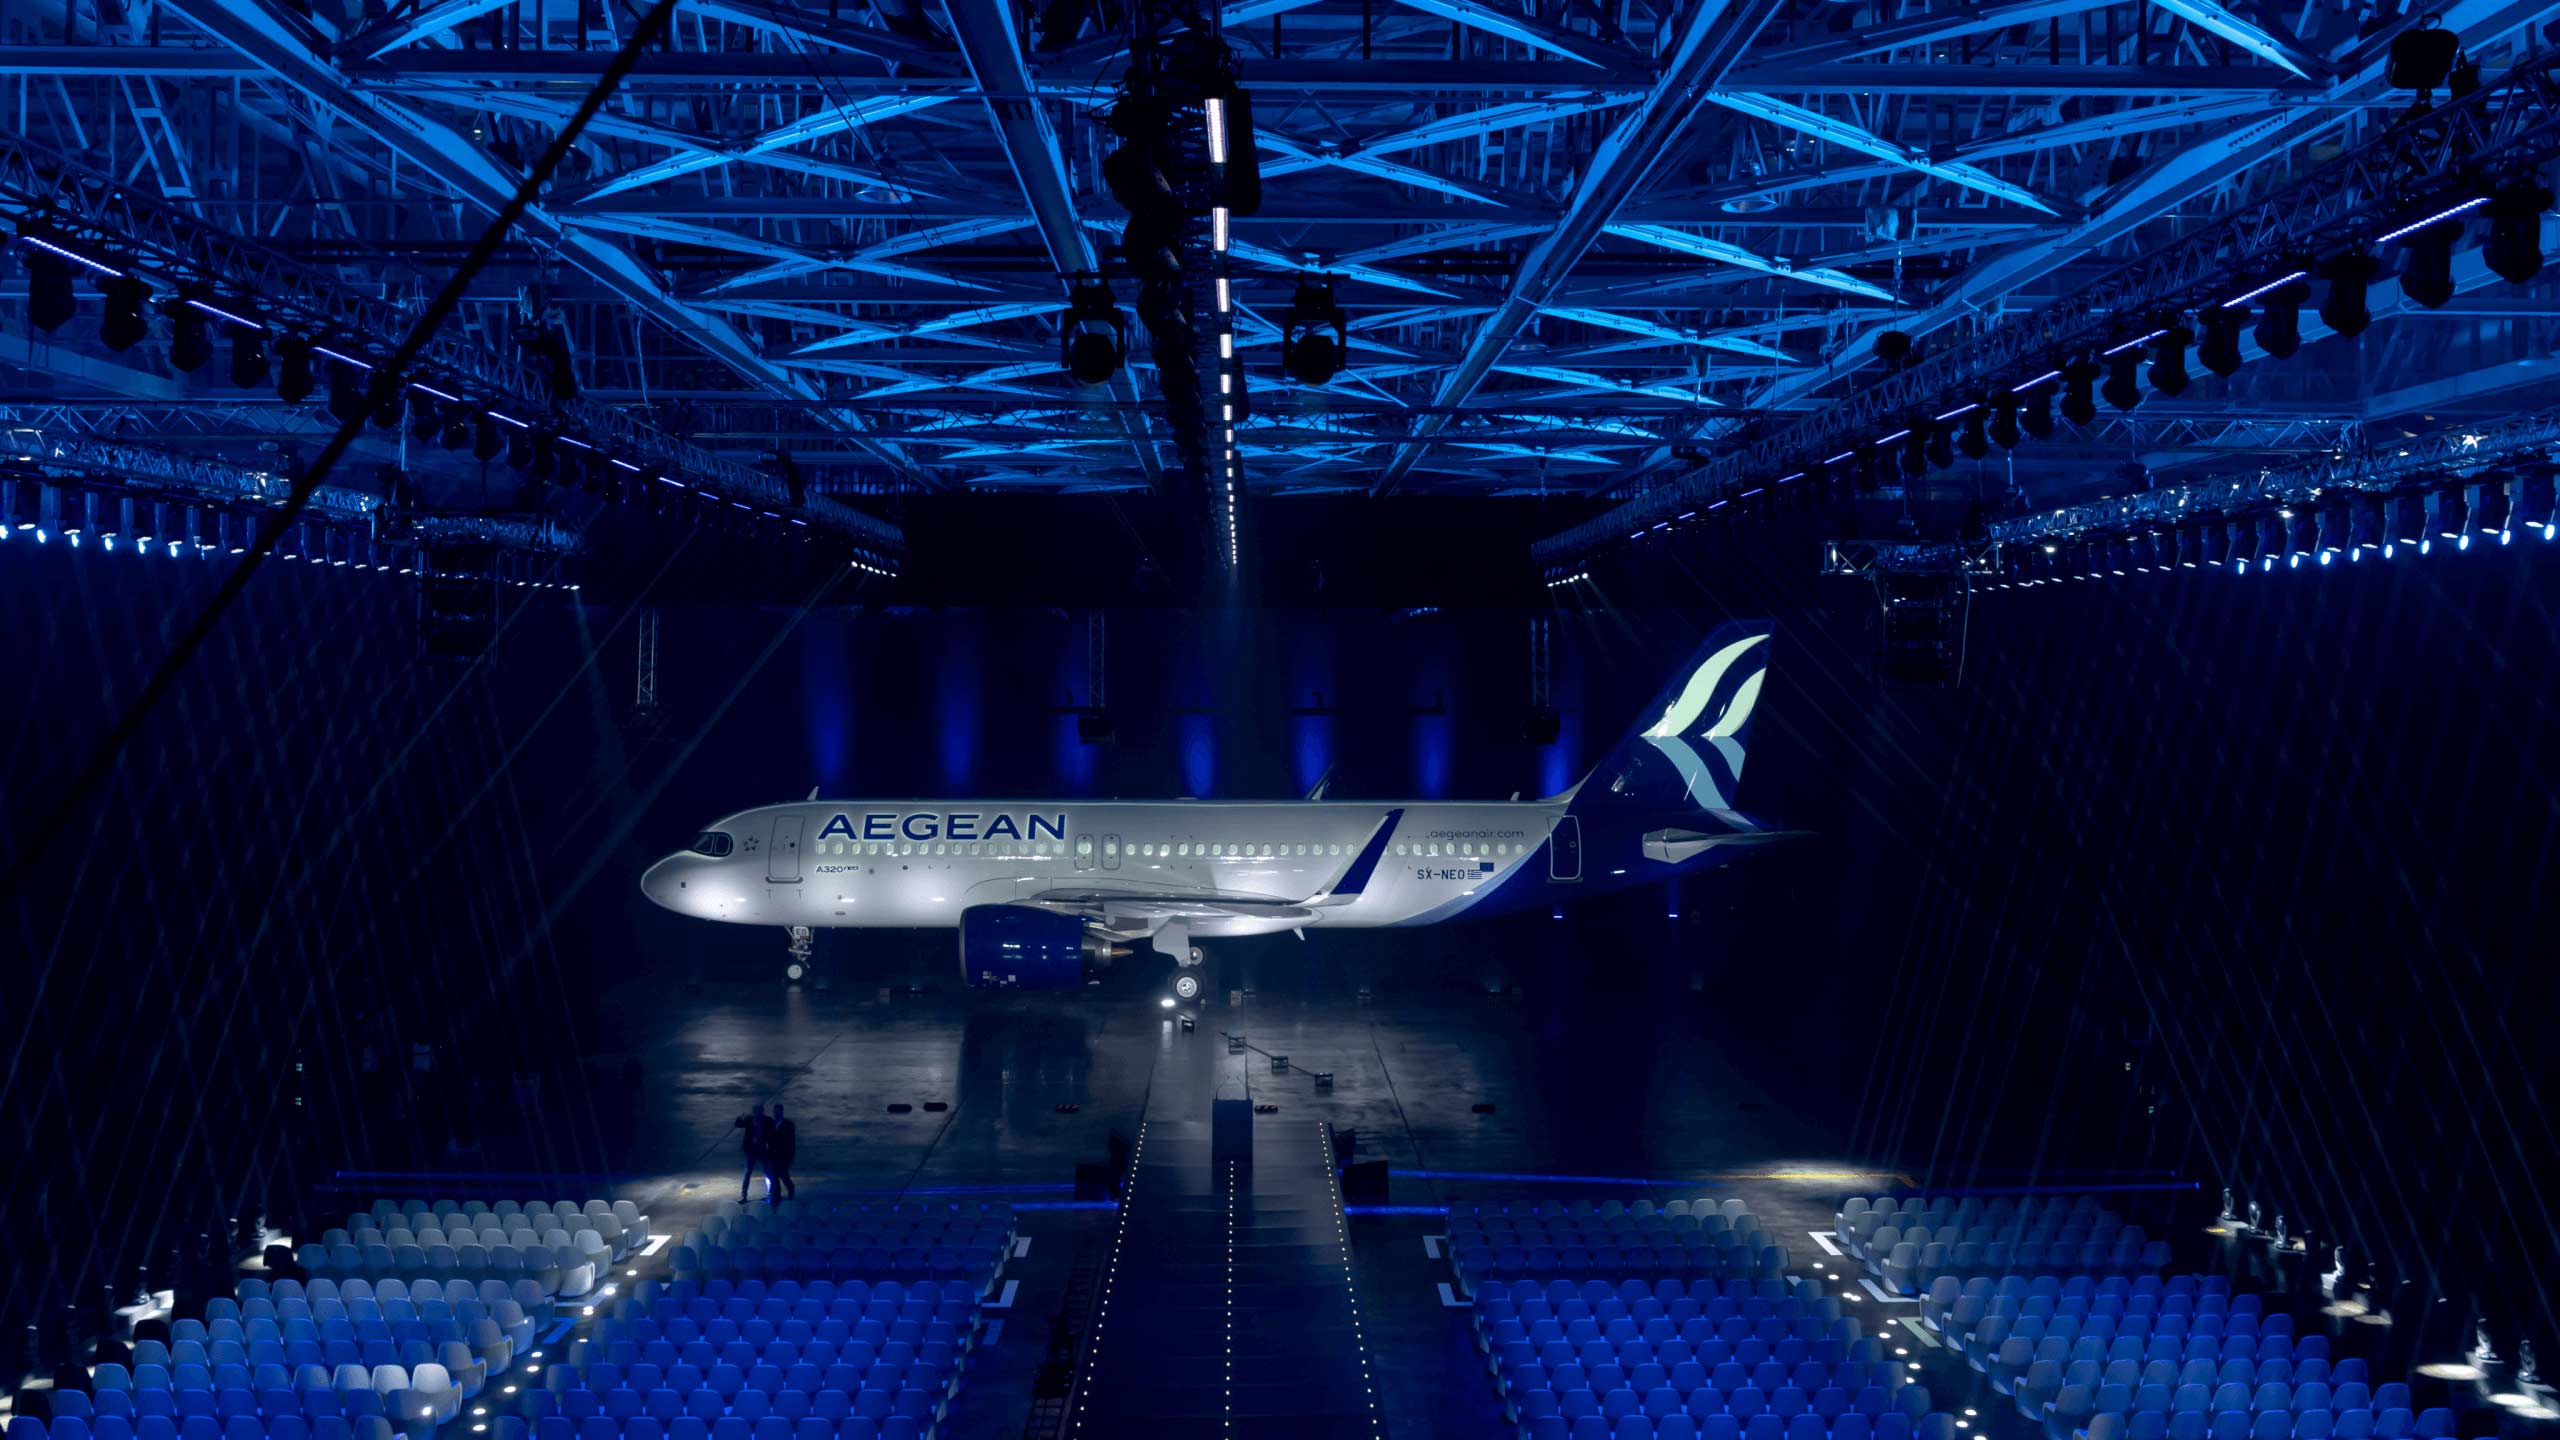 YARD-Aegean Airbus A320neo Reveal Ceremony